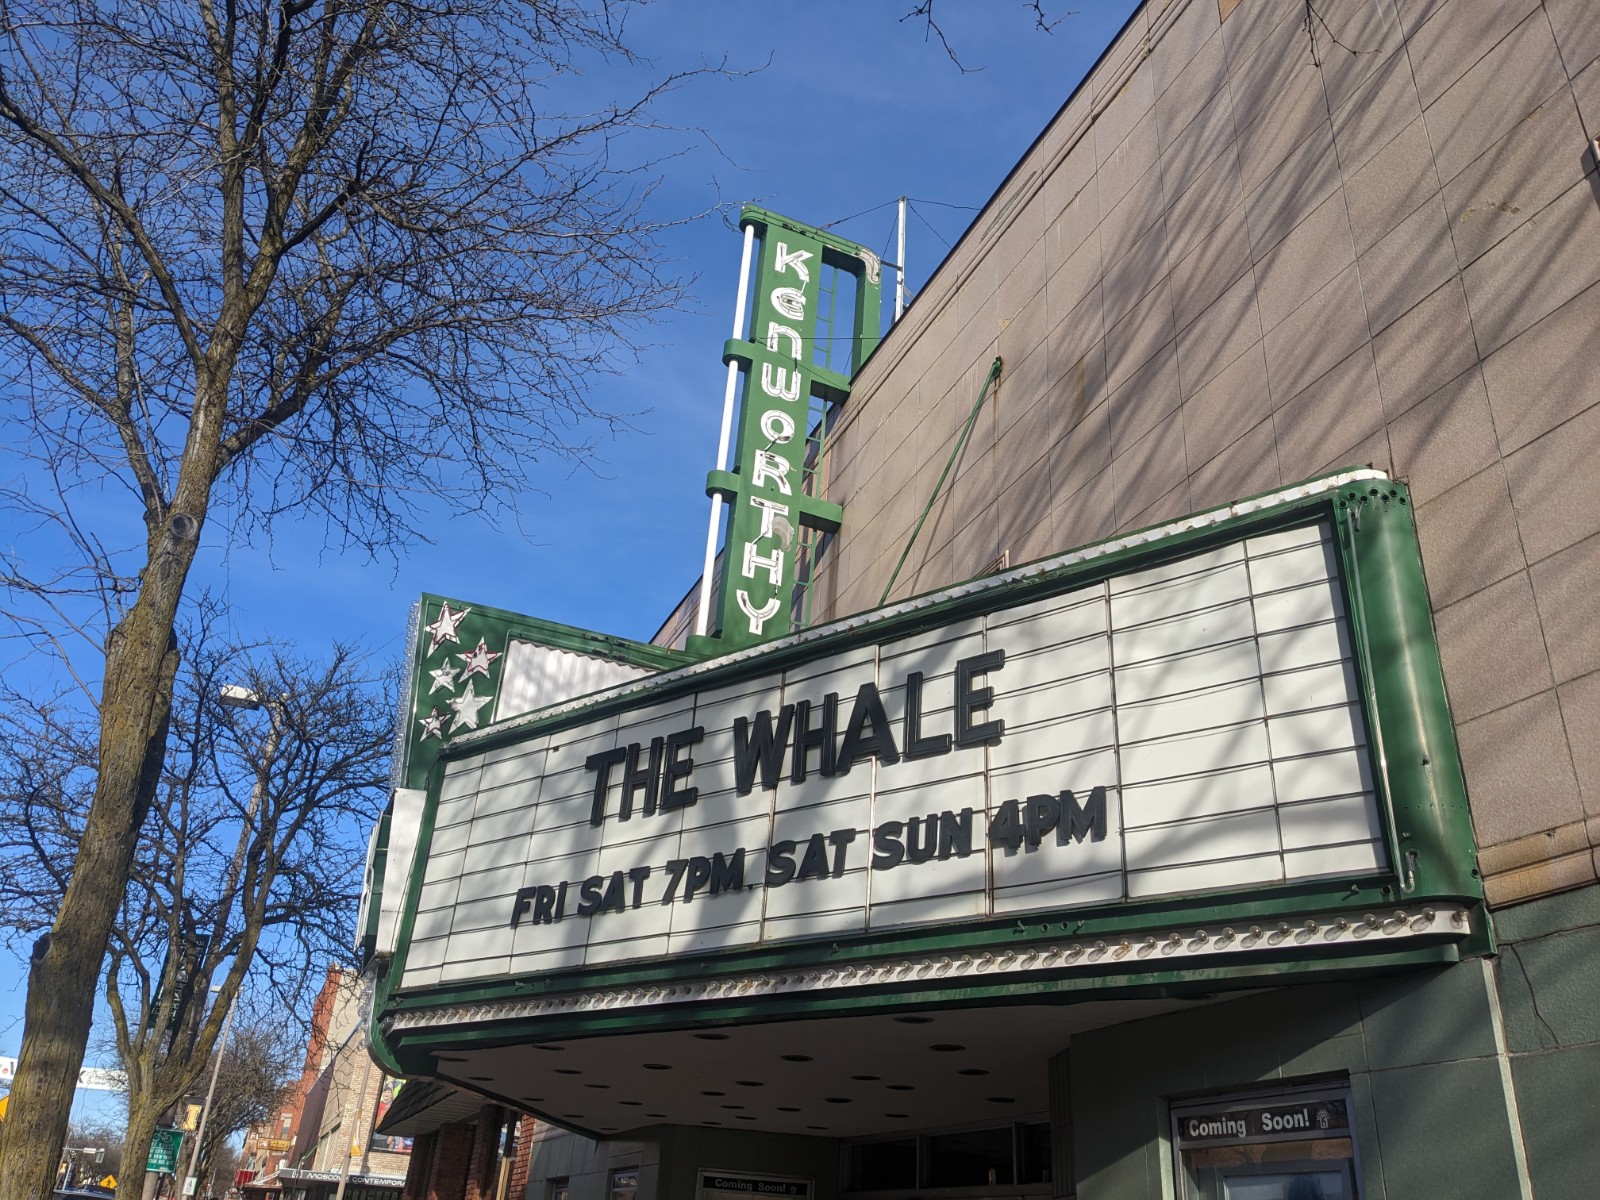 A white marquis spells out THE WHALE in black lettering on the front of an old theater with a green sign that reads "Kenworthy" against a blue sky.